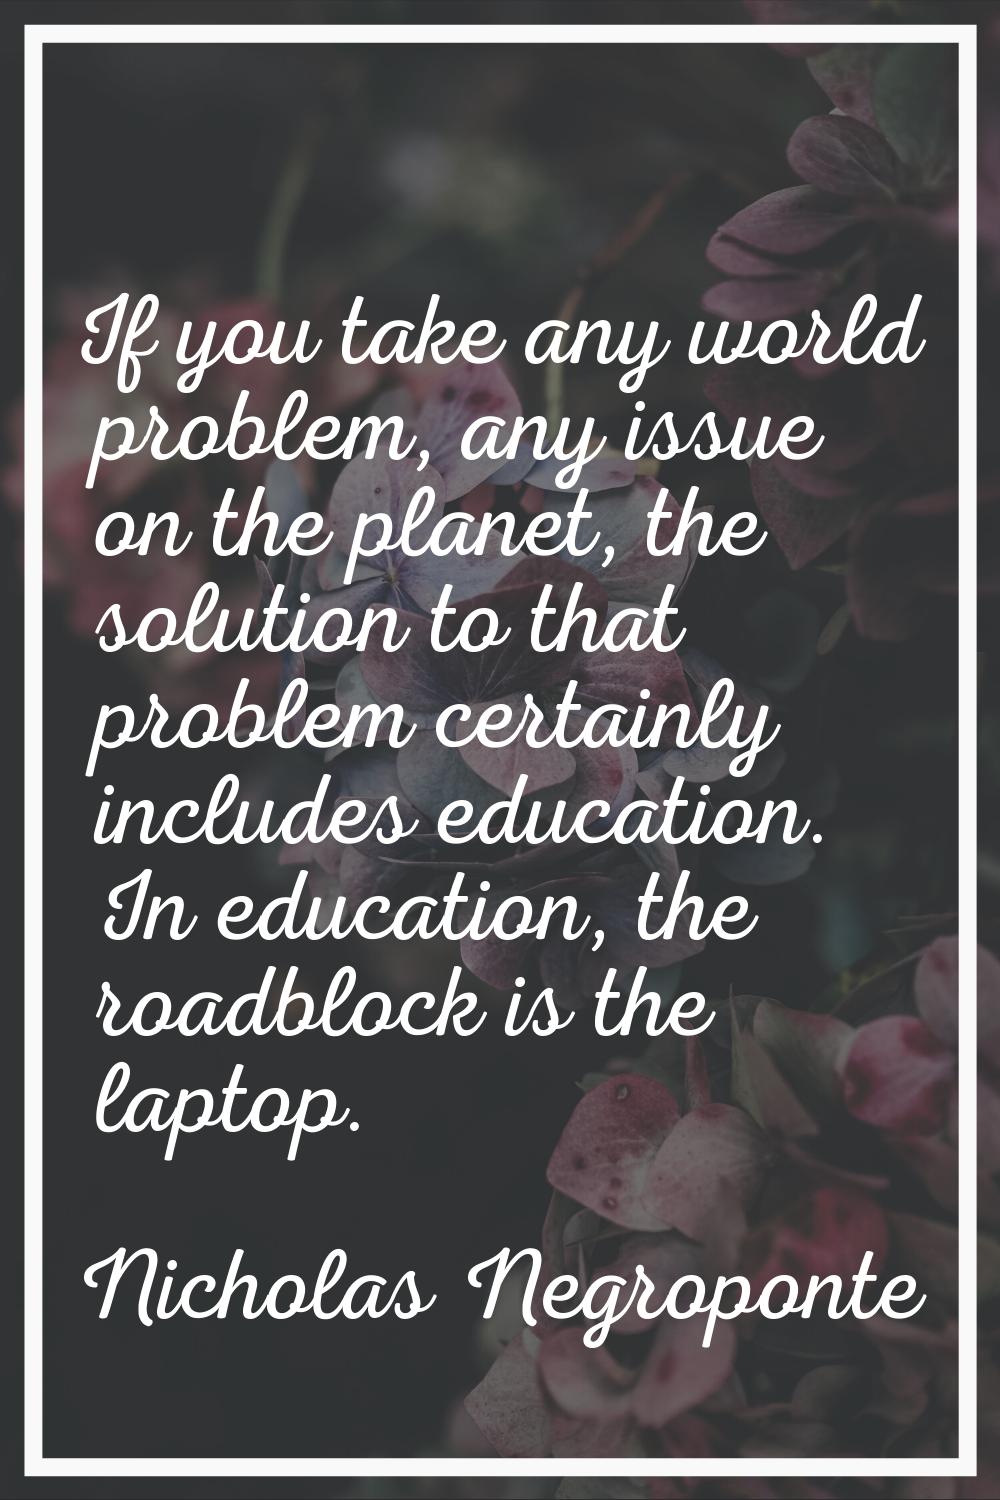 If you take any world problem, any issue on the planet, the solution to that problem certainly incl